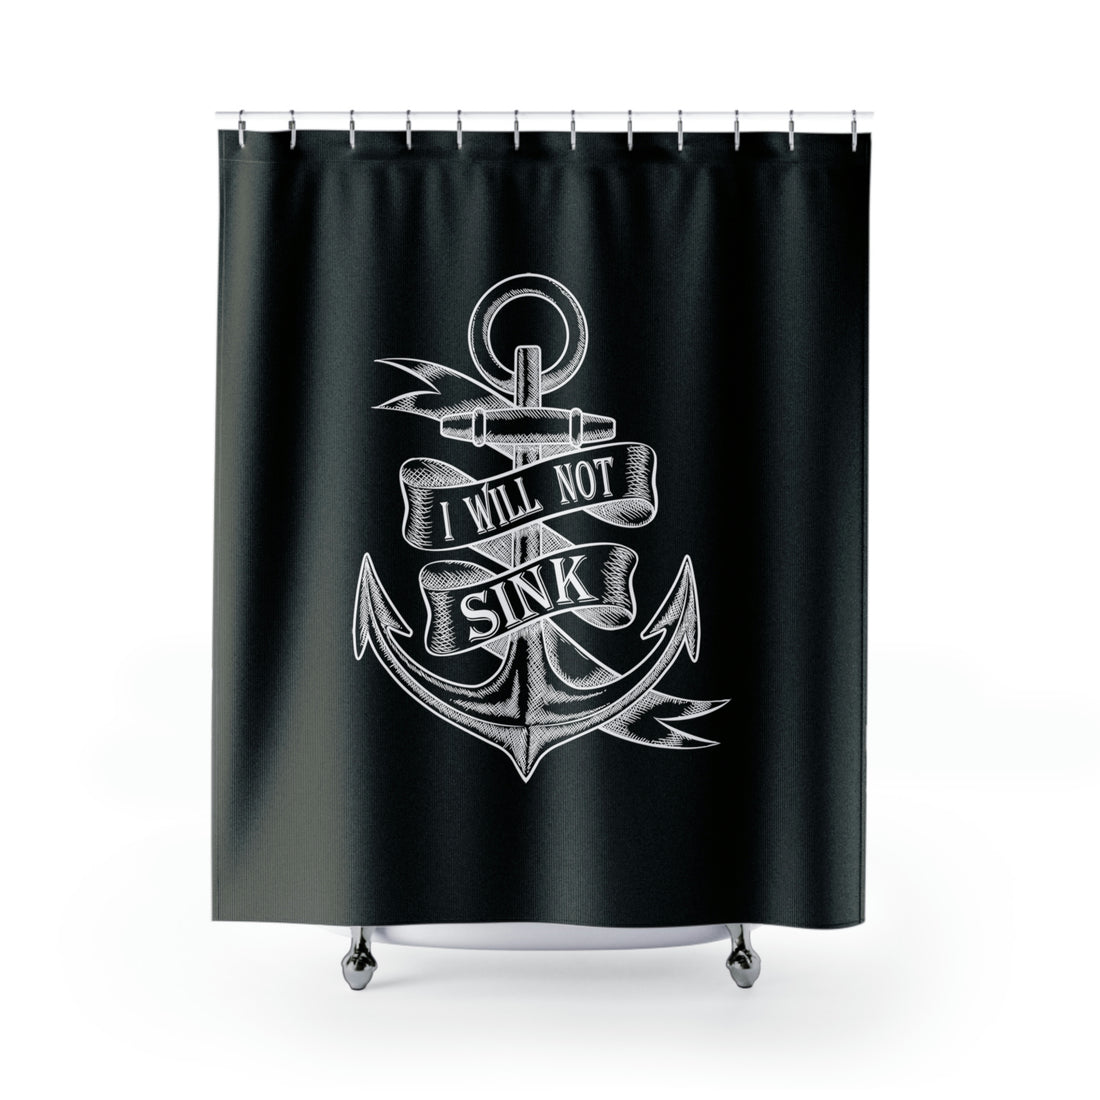 I Will Not Sink - Shower Curtain